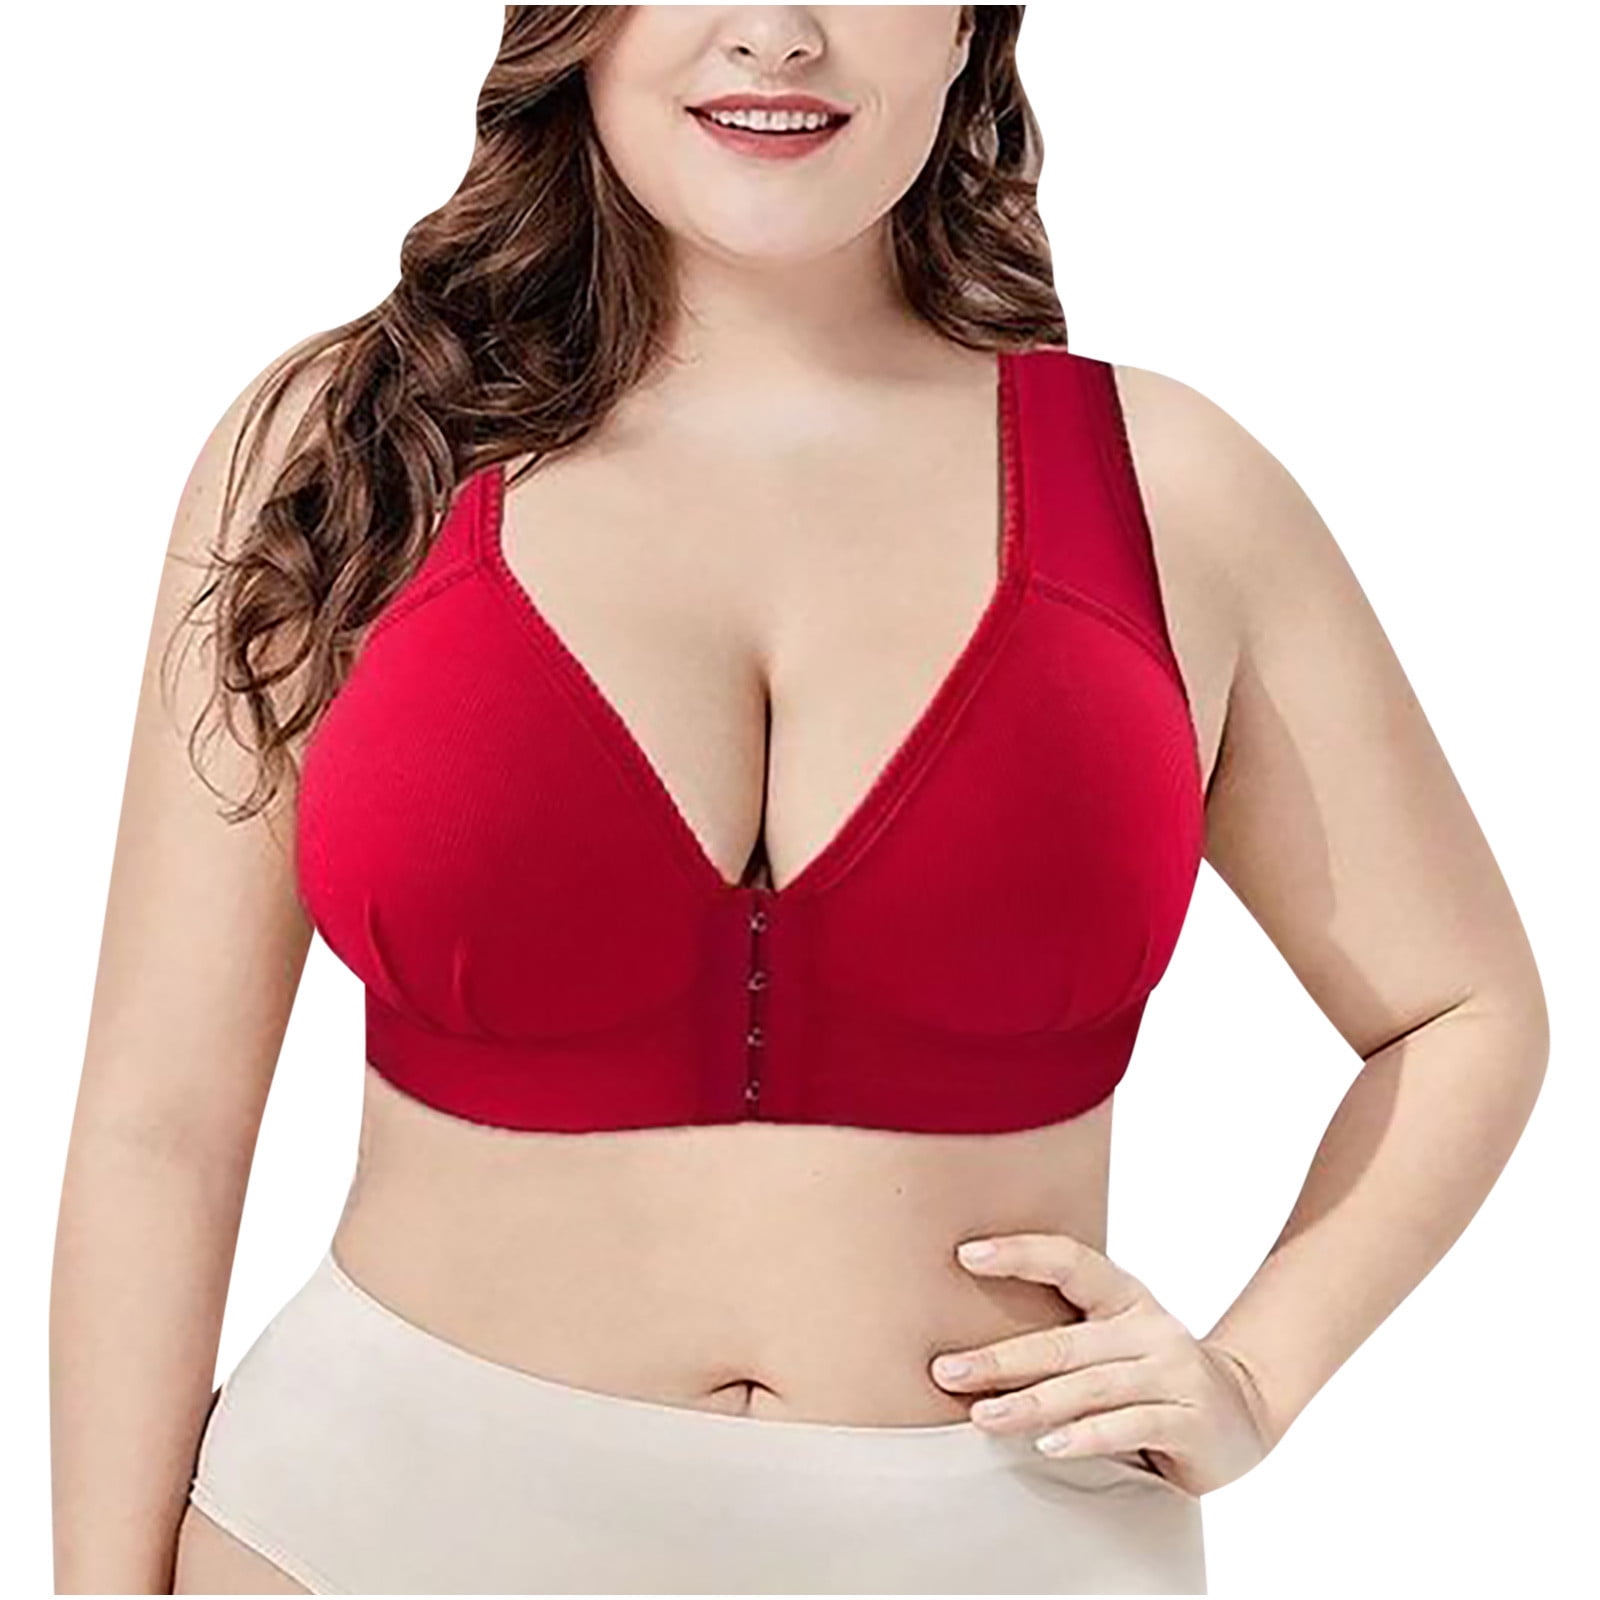 YDKZYMD Front Closure Bras for Women Pull Up Compression Plus Size